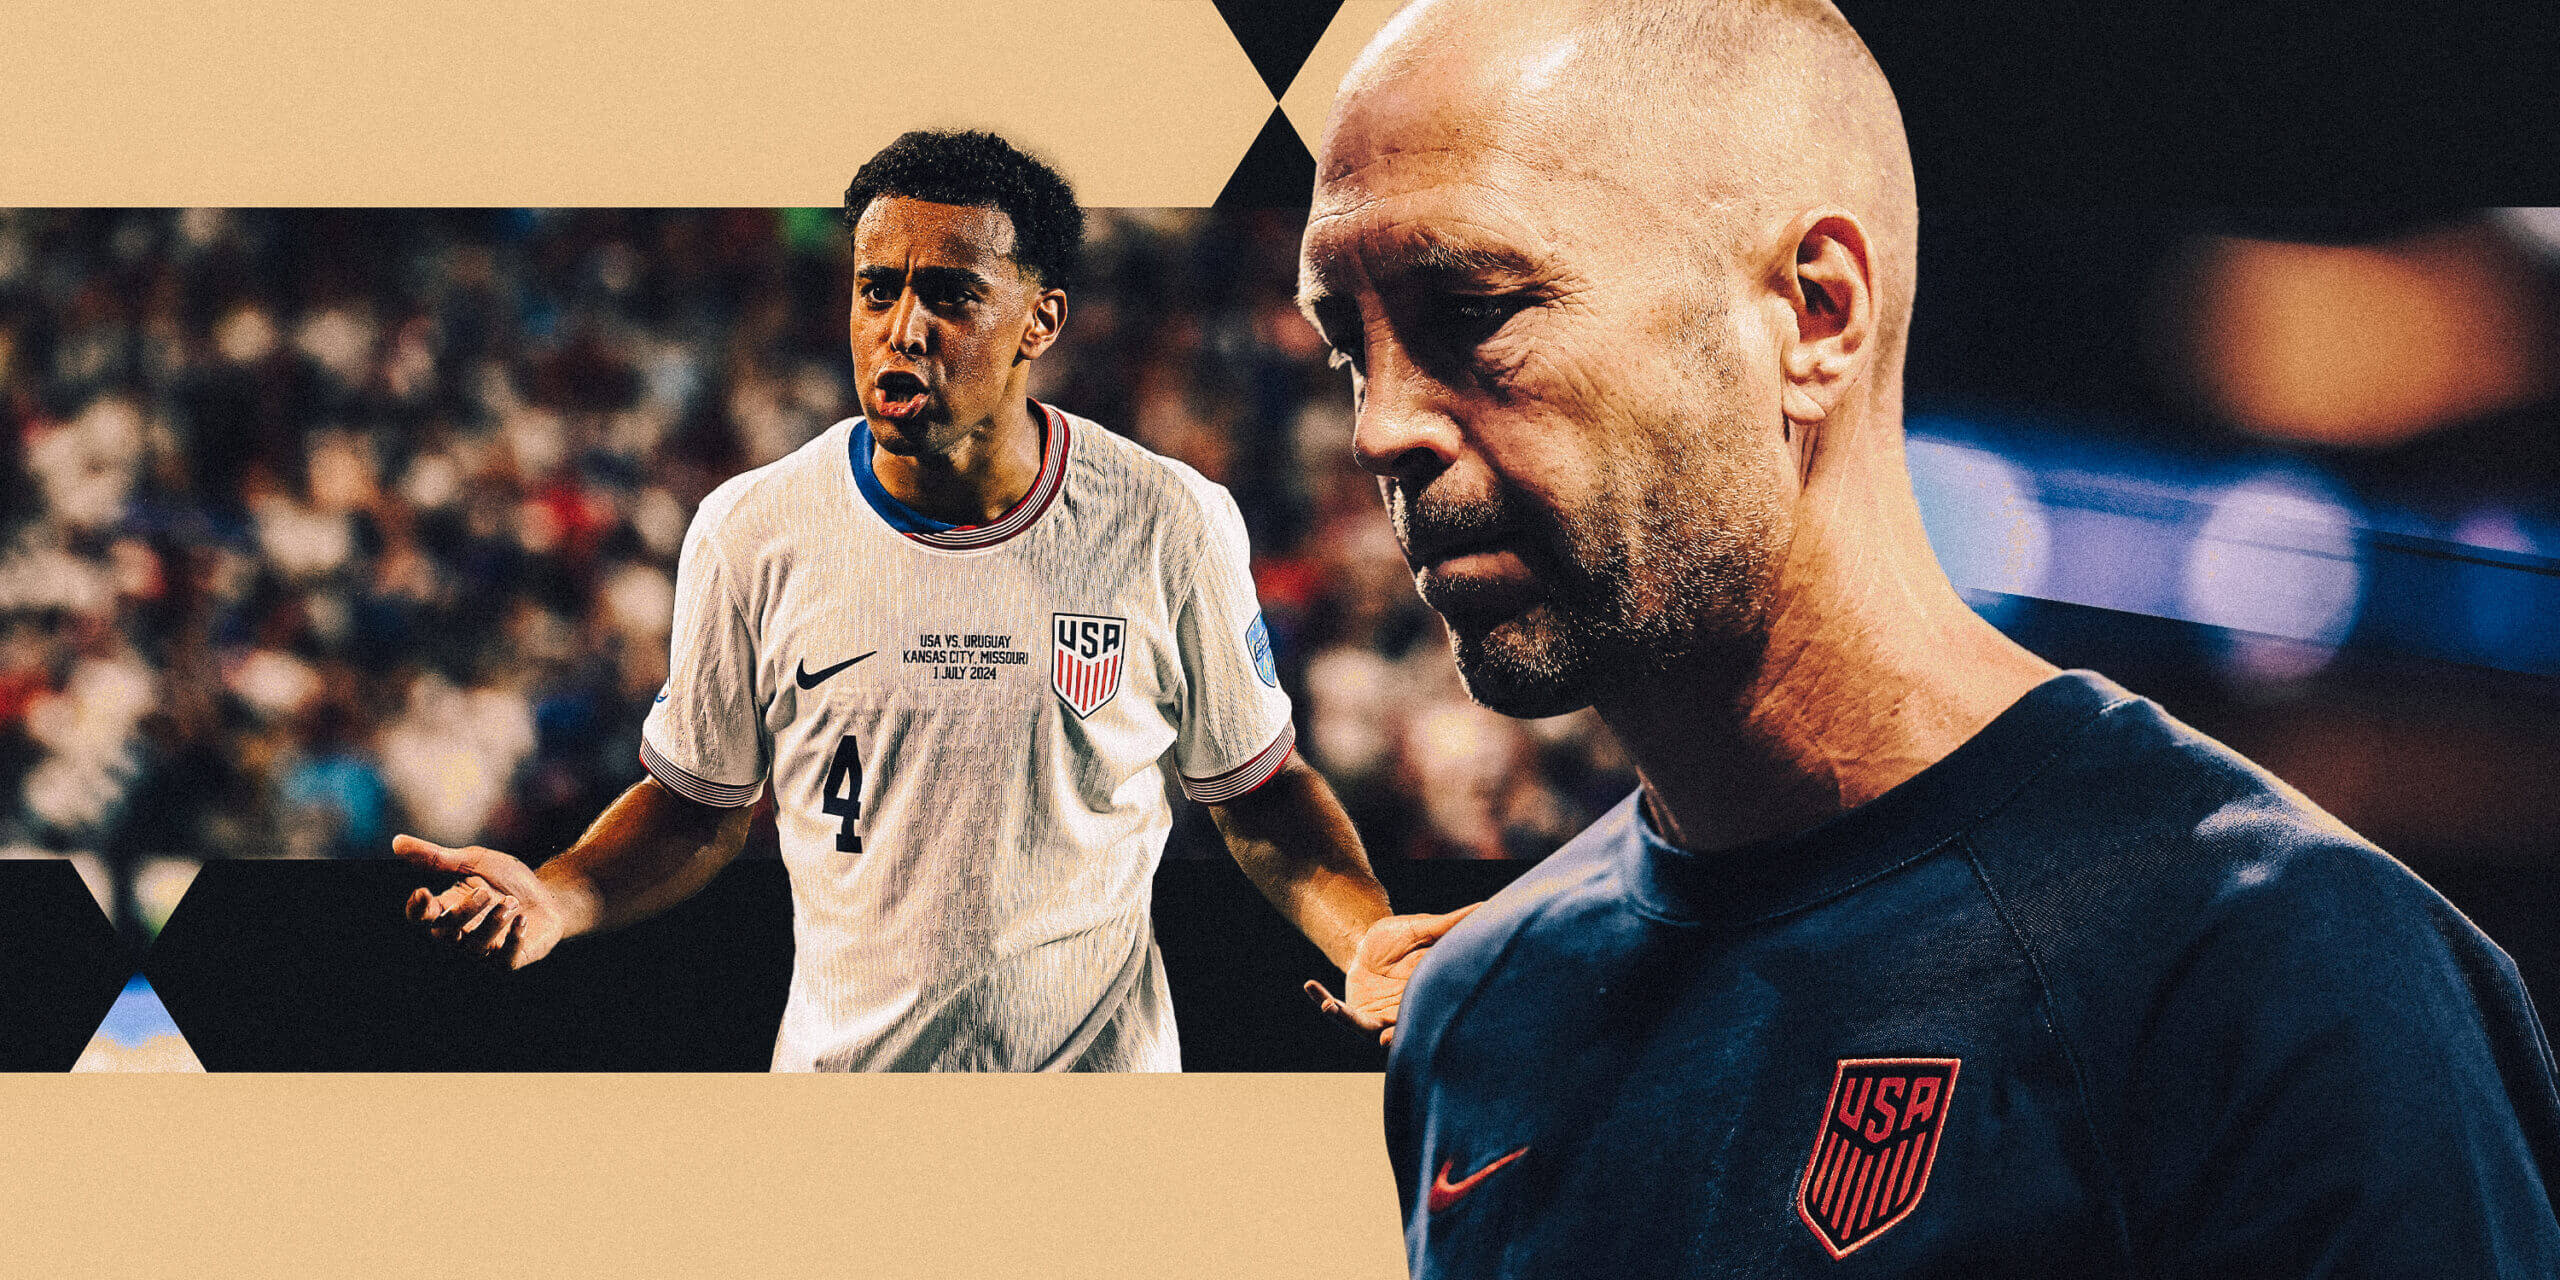 Inside the United States' Copa América exit: 'We must do better'